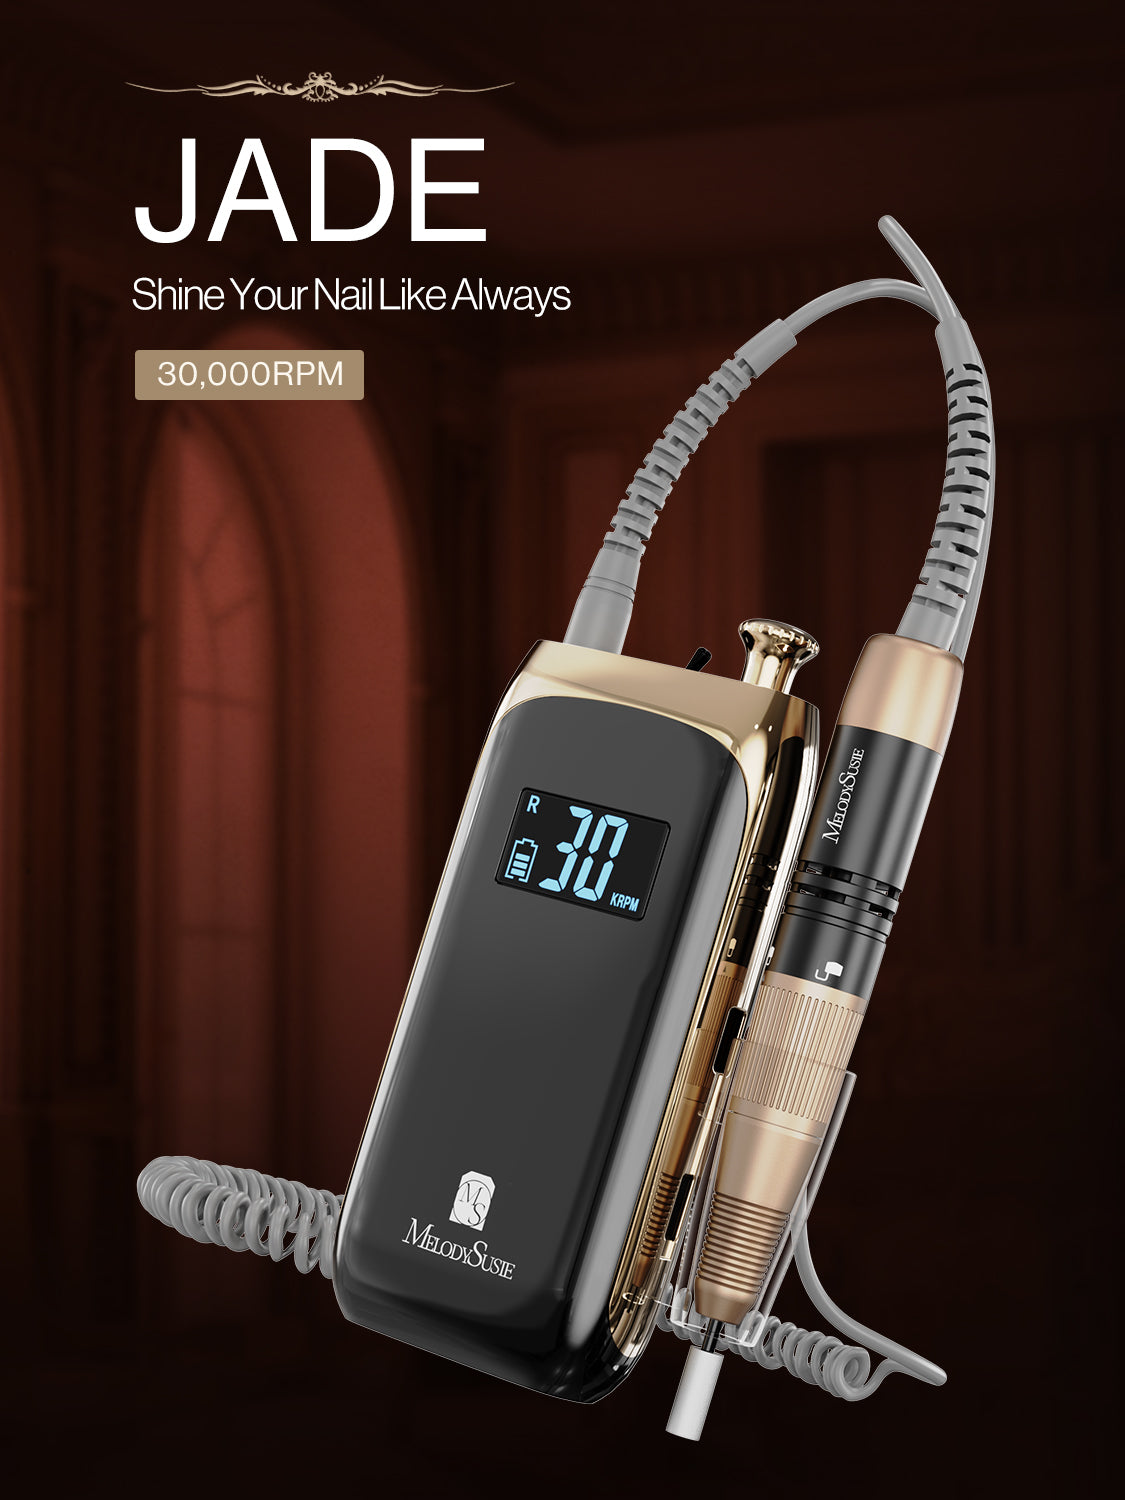 SR3-Jade Rechargeable Nail Drill 30,000RPM (Black)